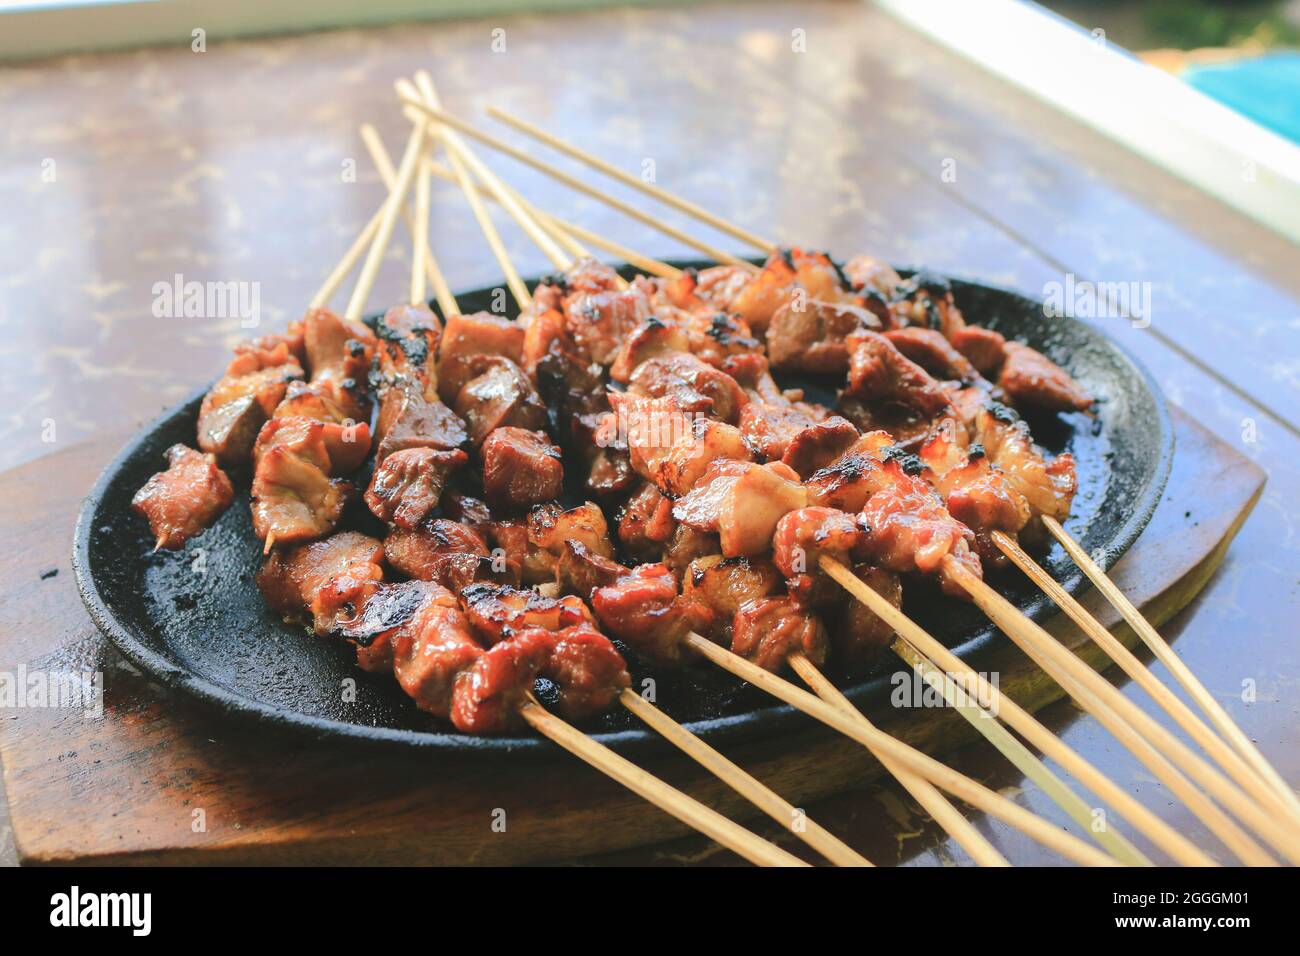 Goat satay or sate kambing in the hot plate Stock Photo